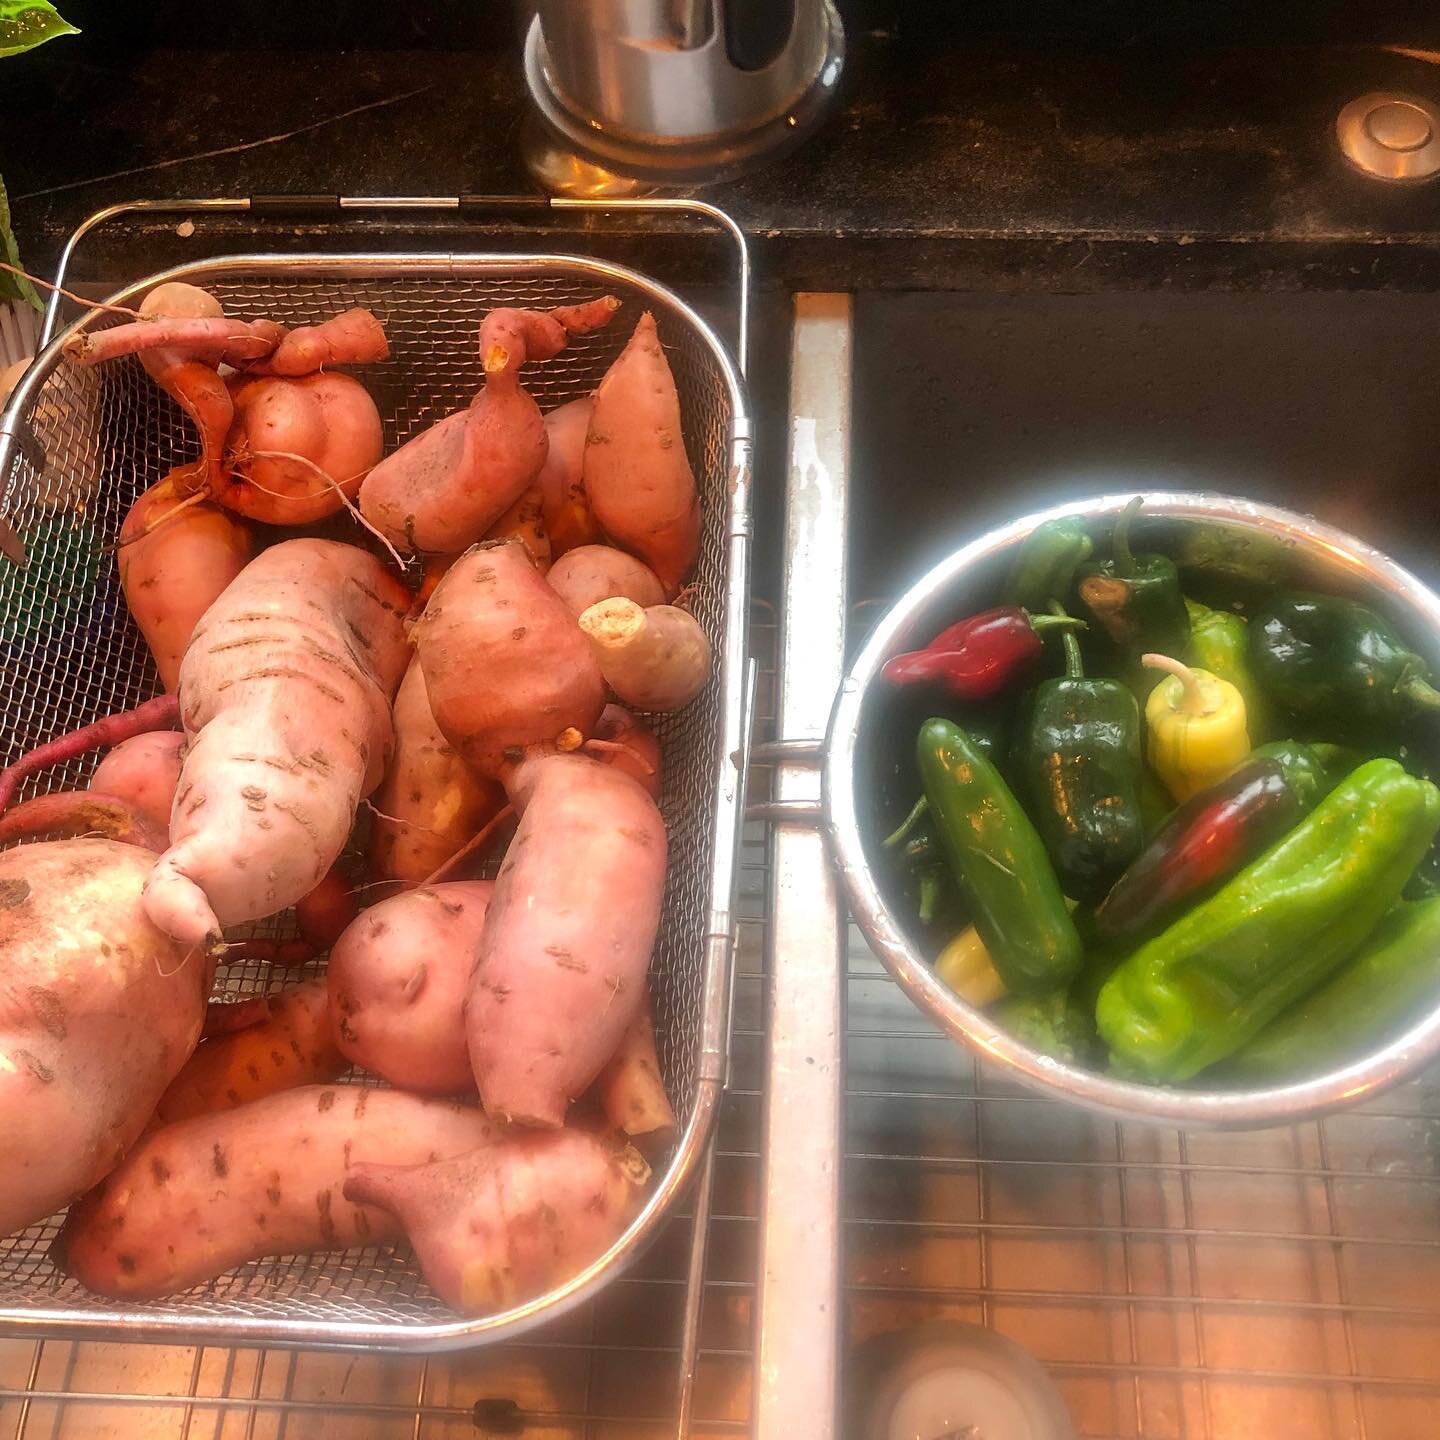 Today&rsquo;s haul from the garden... elbow deep in mud, unearthing these sweet potatoes. I envision sweet potato black bean chili in my very near future! #bounty #cornucopia #gardening #cookingathome #exhausted